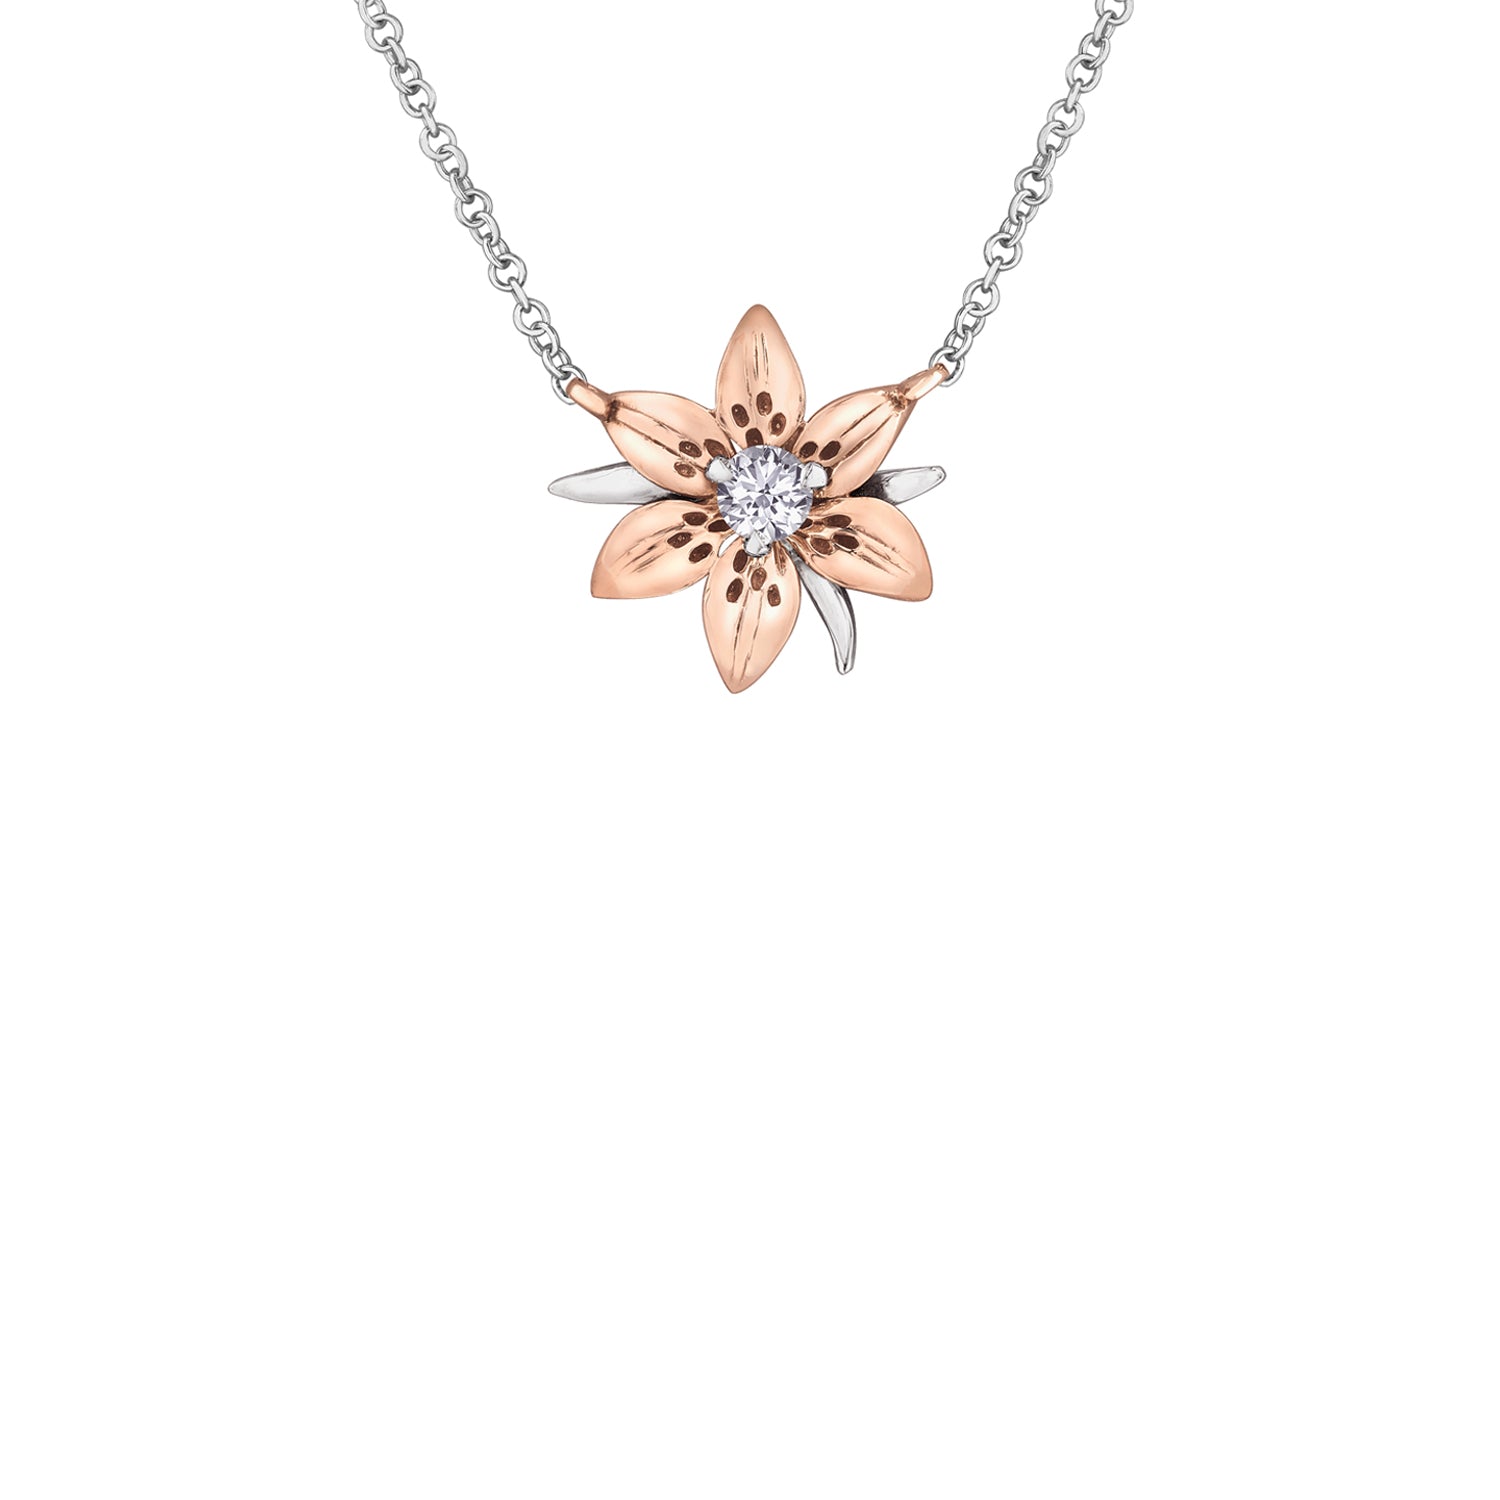 Crafted in 14KT white and rose Certified Canadian Gold, this necklace features a Saskatchewan western red lily flower set with a round brilliant-cut Canadian diamond